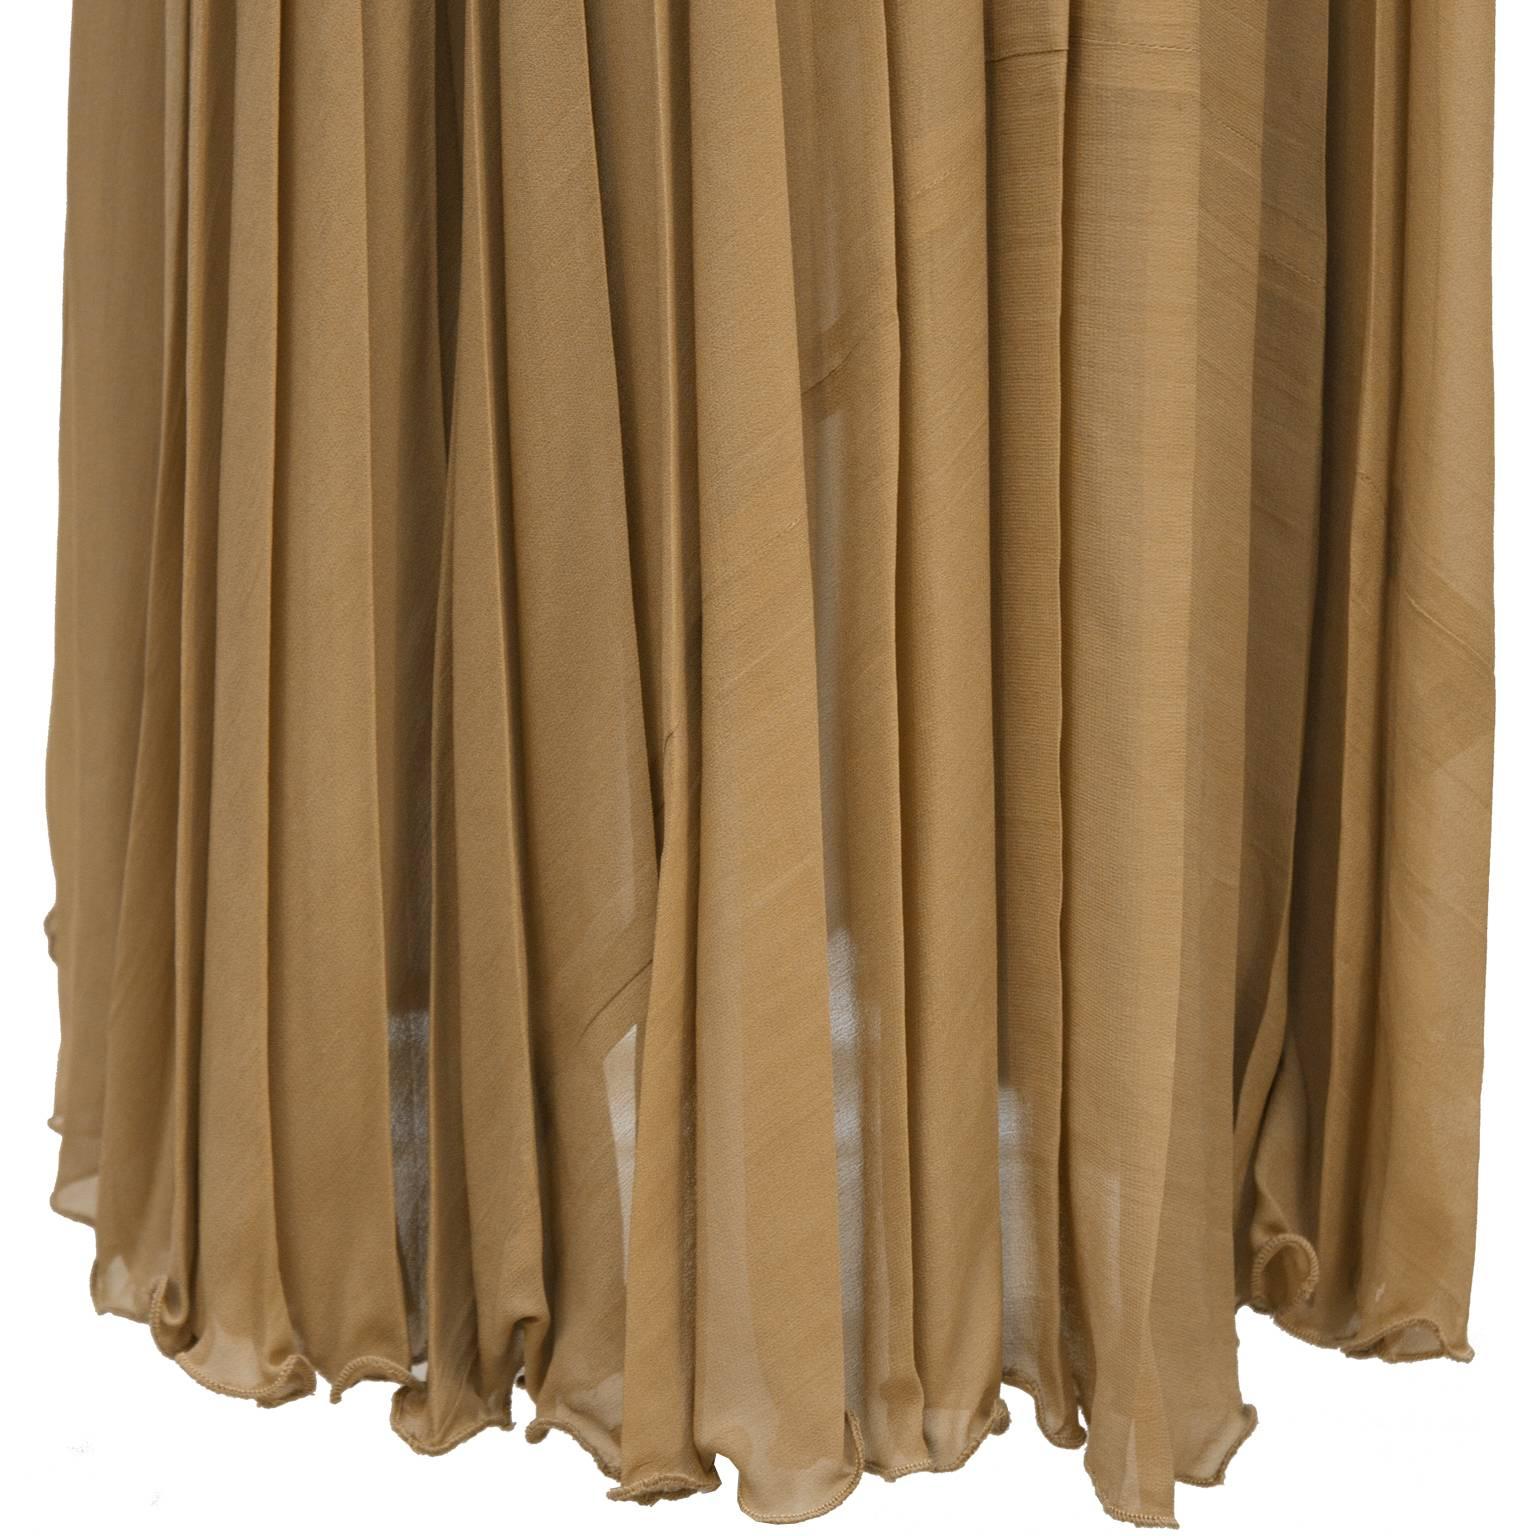 Bill Blass Mocha Chiffon Pleated Gown w/ Belt In Excellent Condition For Sale In Toronto, Ontario